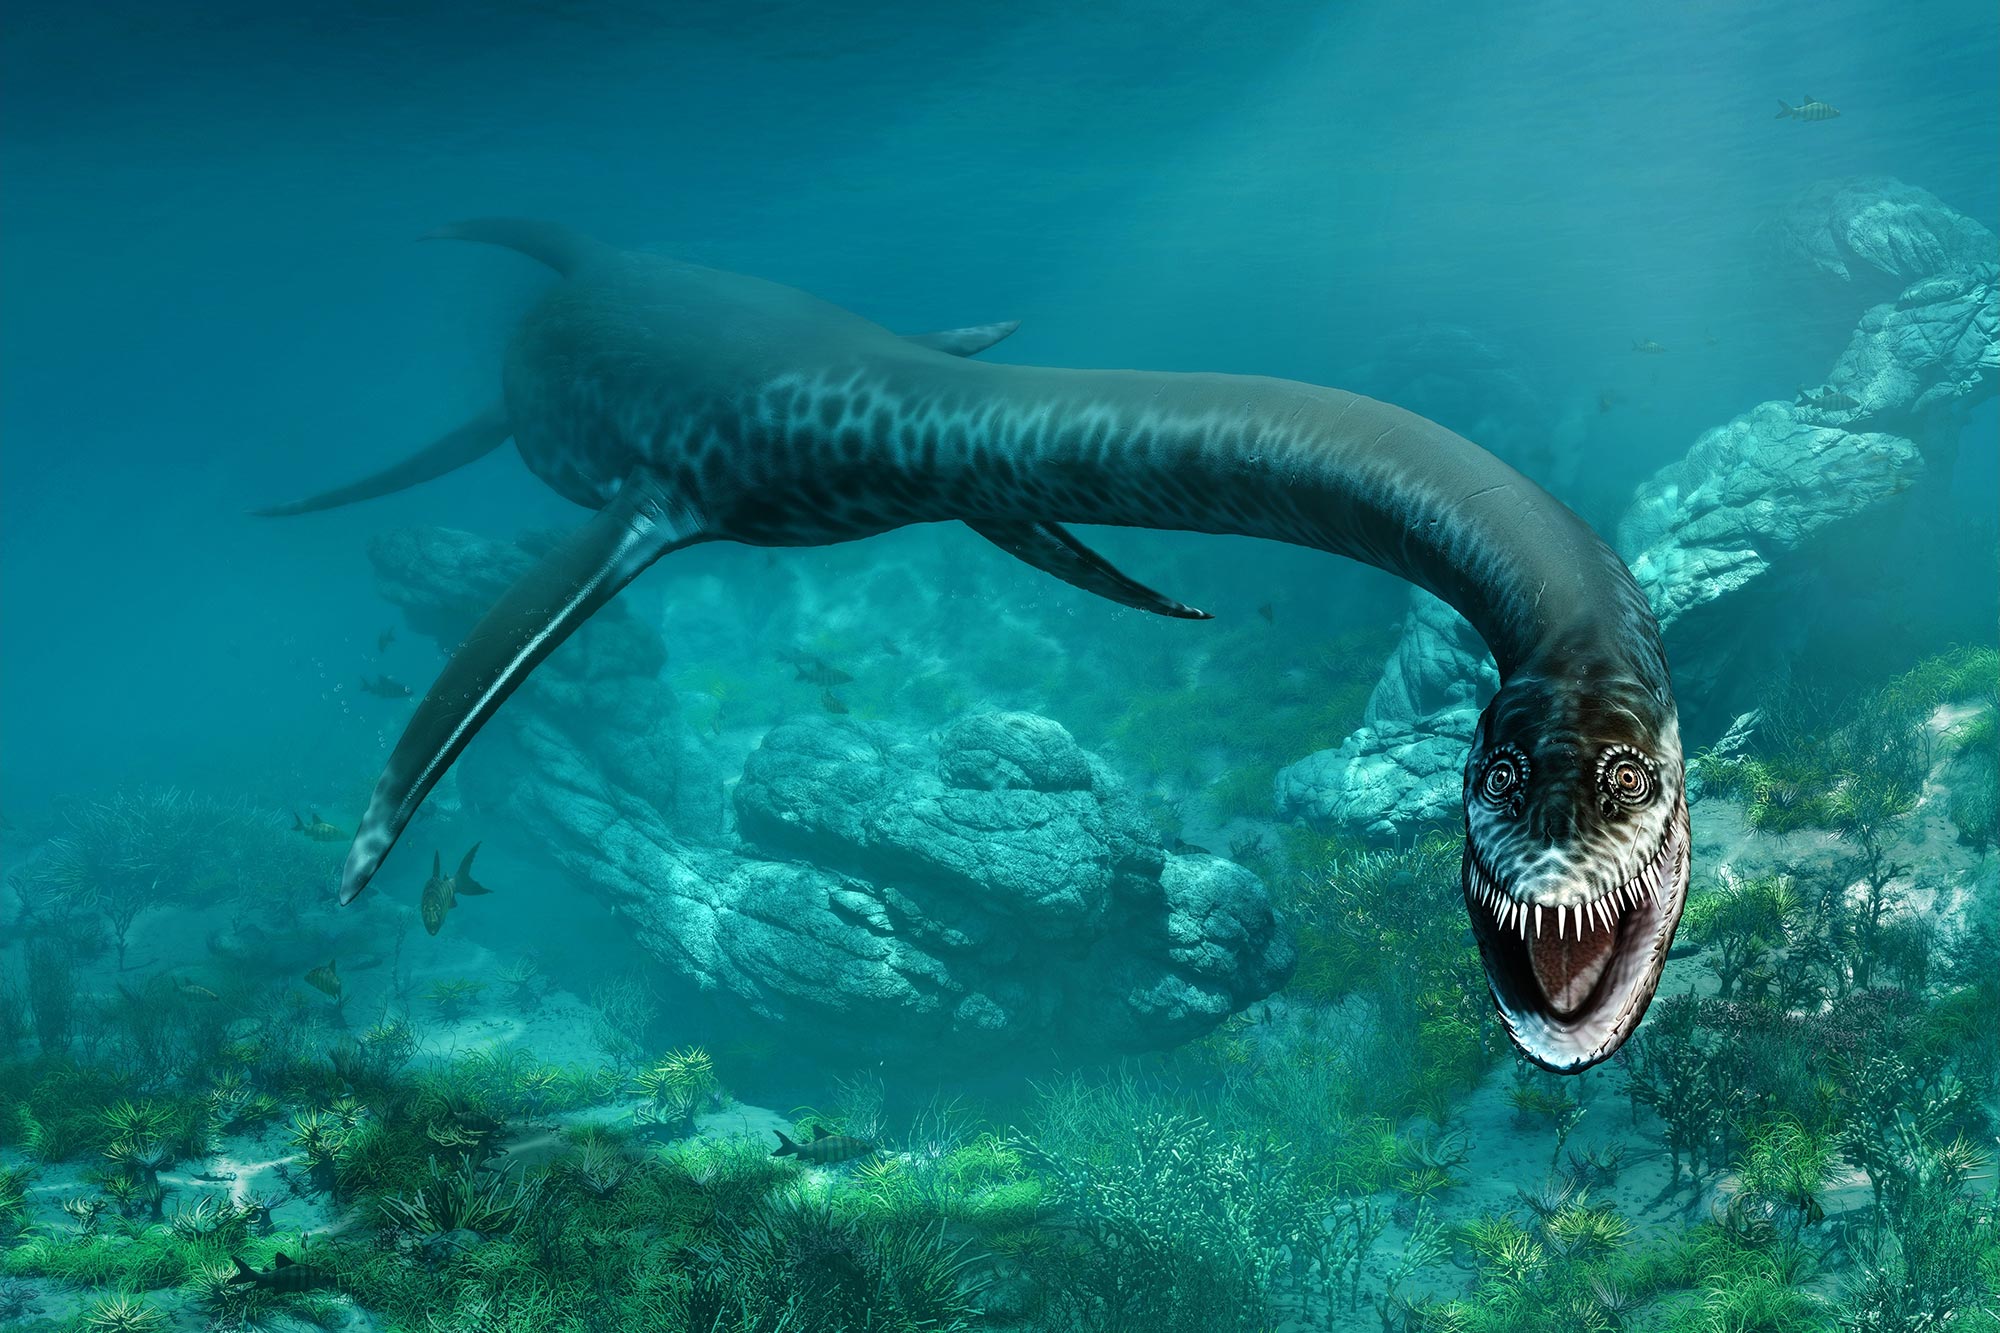 Scientists Solve a 120-Year-Old Mystery: How Did the Monstrous Plesiosaurs Swim? - SciTechDaily